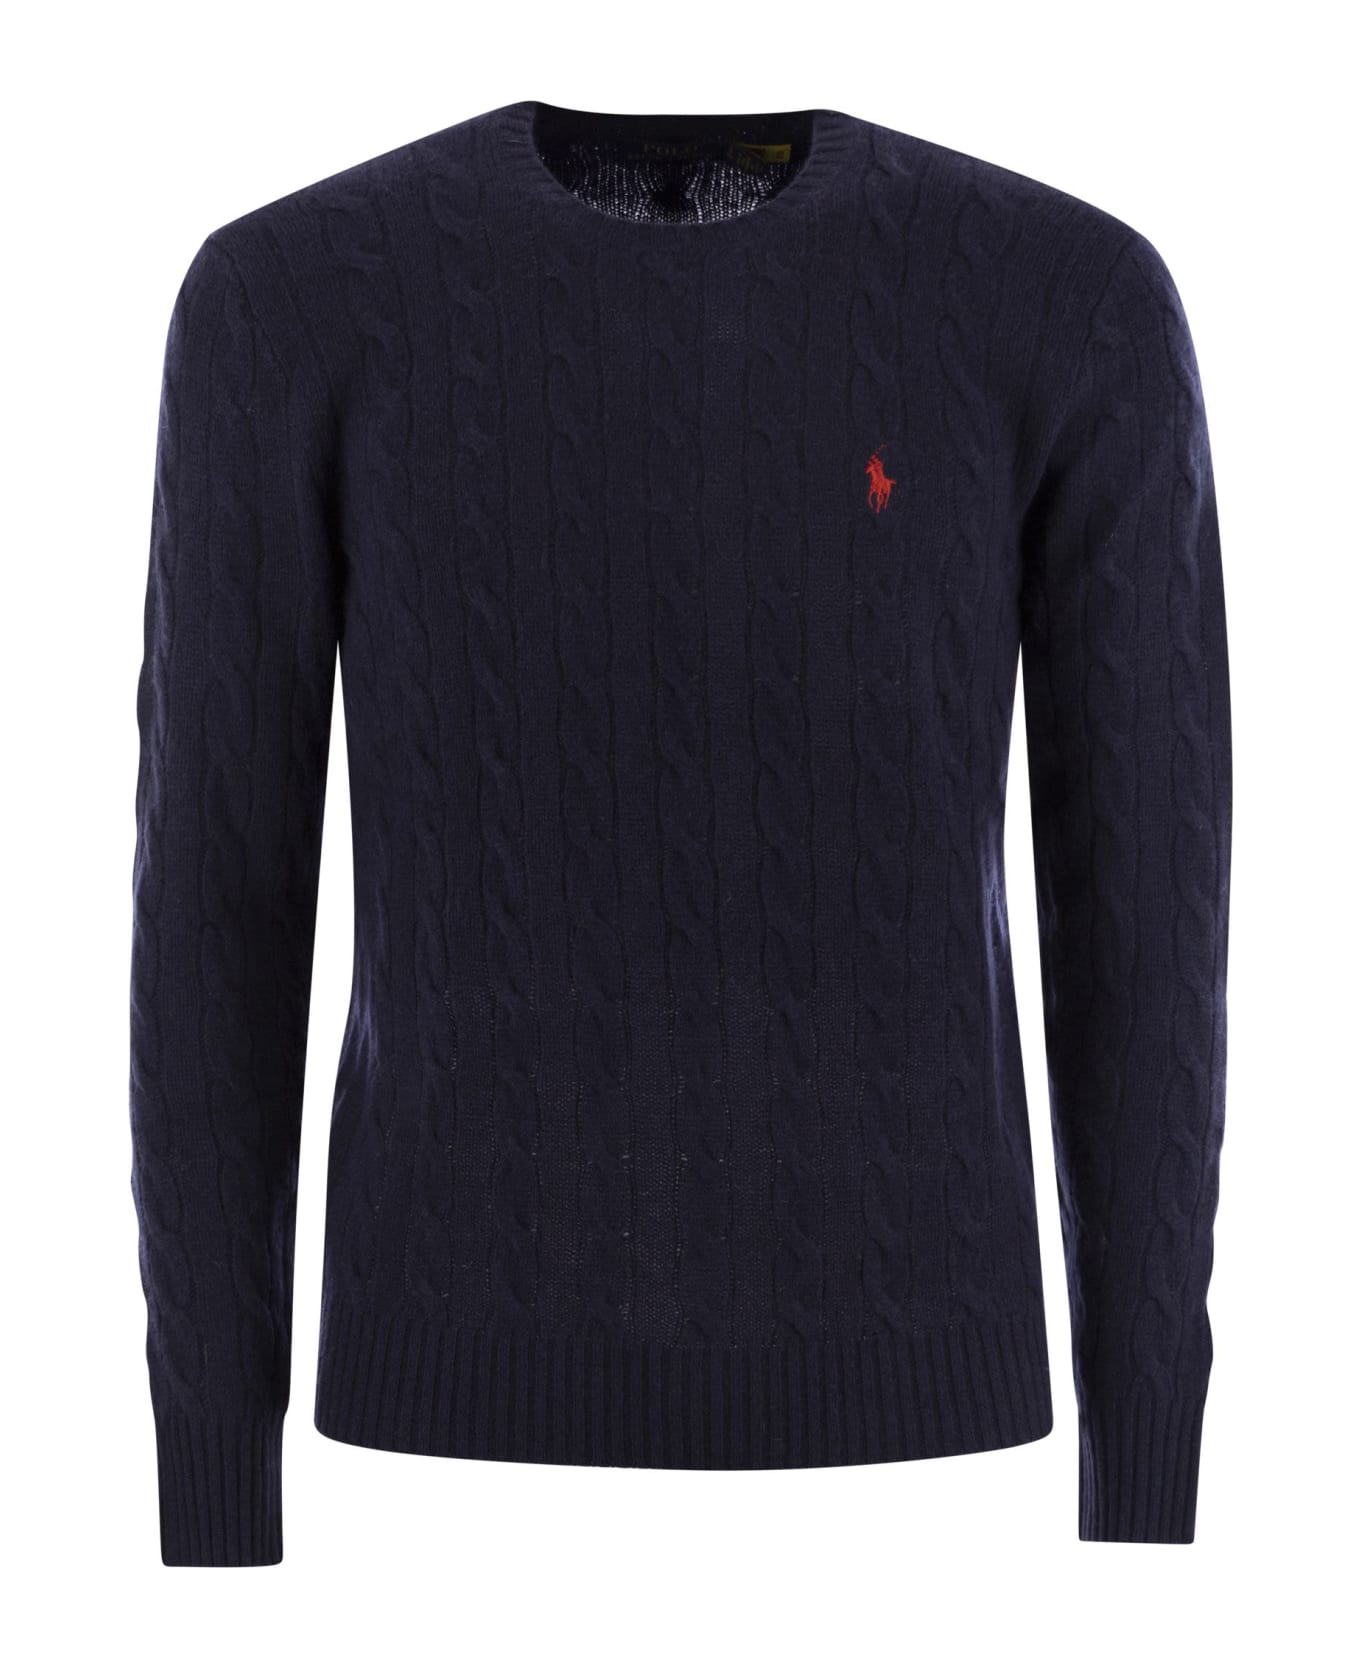 Polo Ralph Lauren Ribbed Sweater - Navy